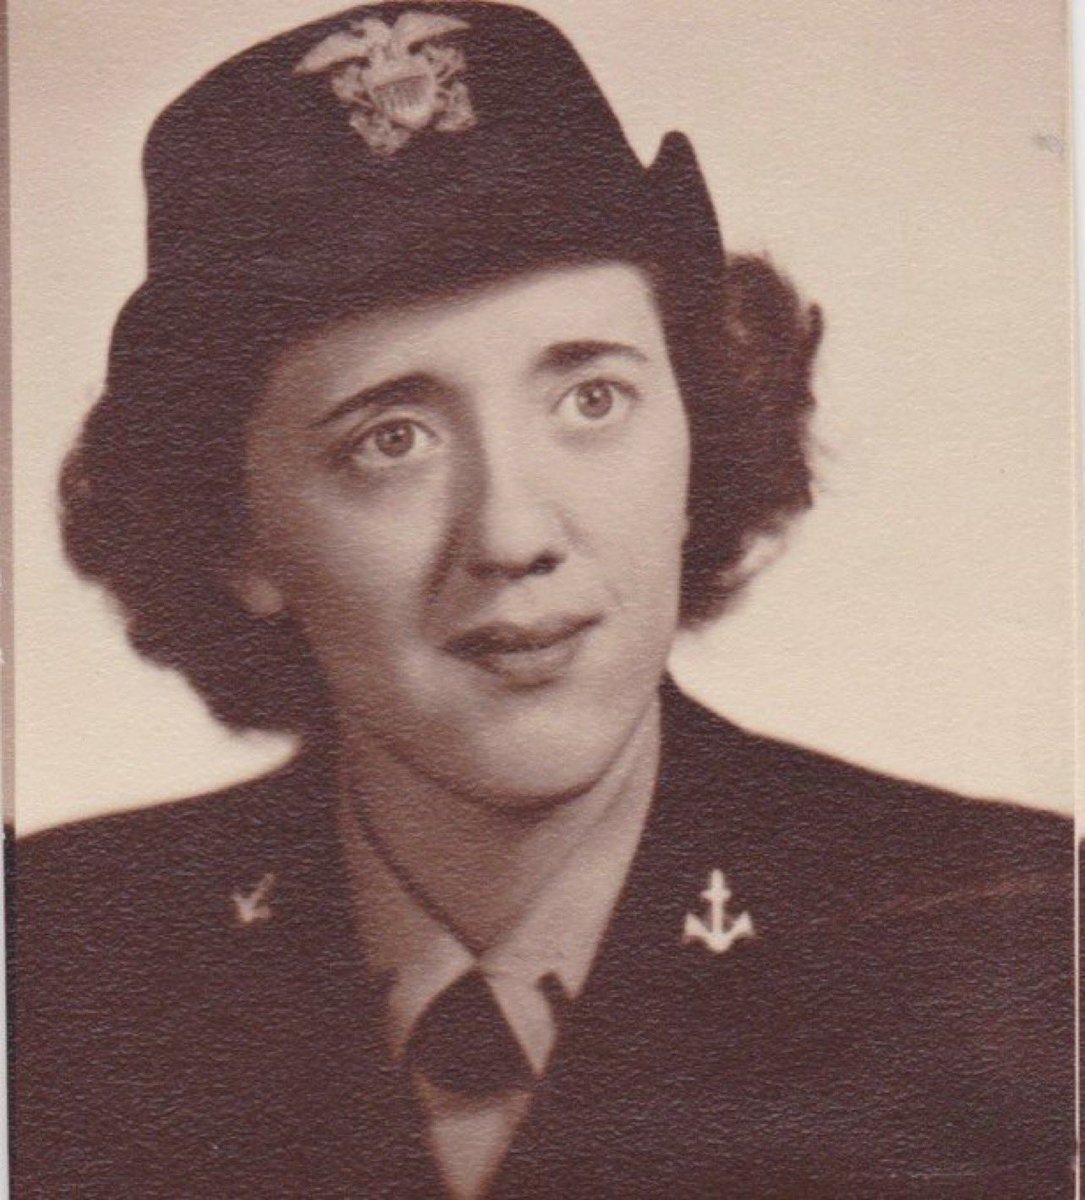 Lt. Jane Patterson, WAVE. Killed in a military train crash in ND on 8/9/45, among the last casualties of the war. Four years later, her little sister had a baby and named my mother after her. #MemorialDay2023